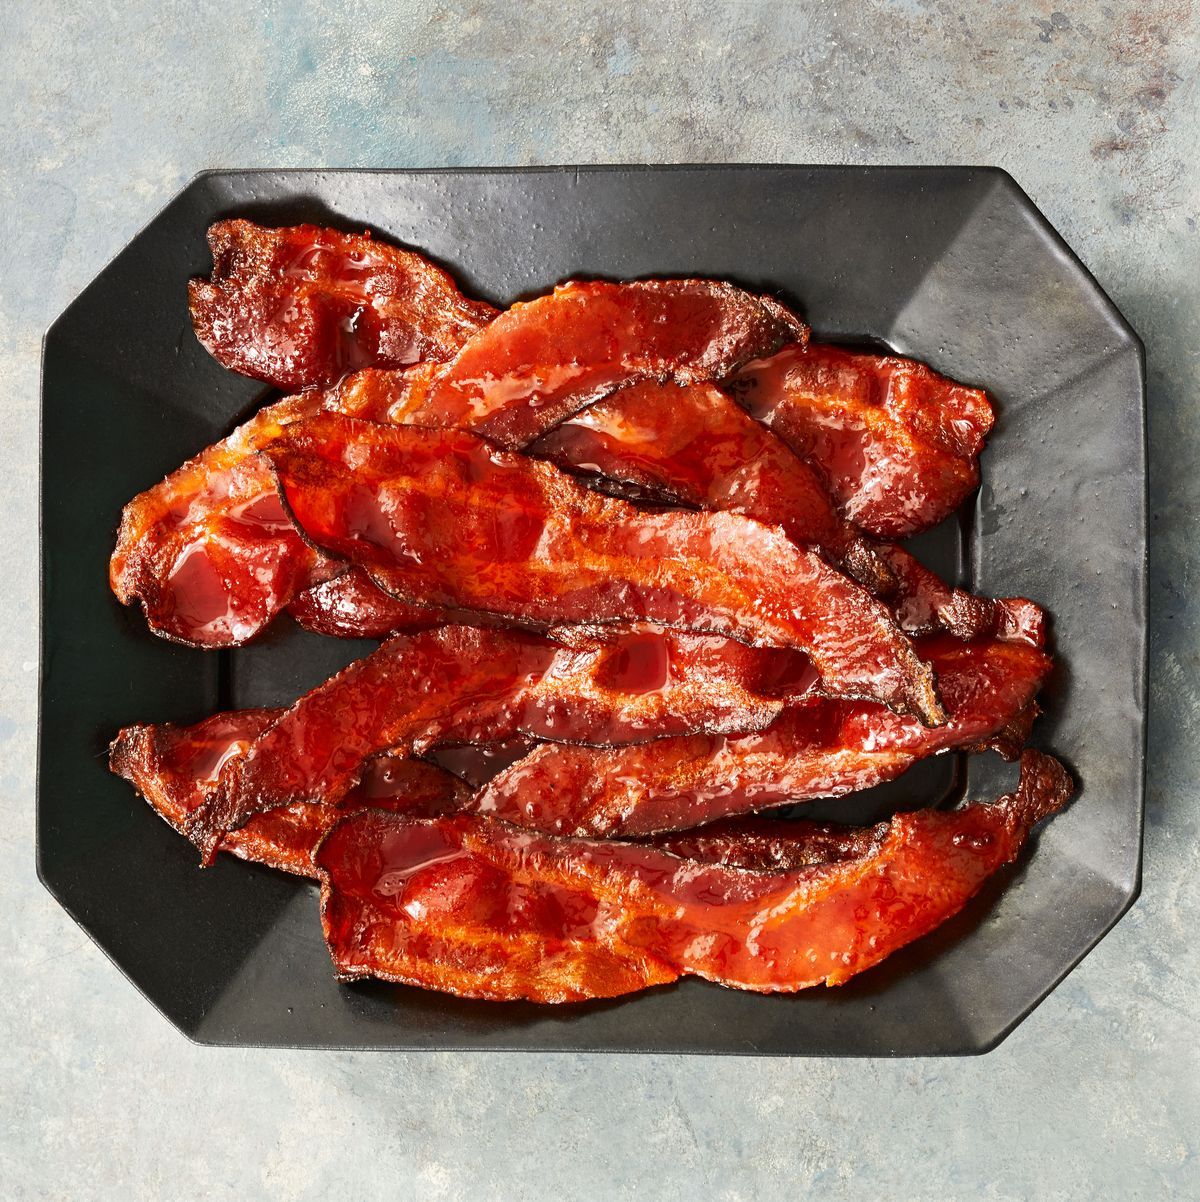 https://hips.hearstapps.com/hmg-prod/images/how-to-cook-bacon-in-the-oven-sriracha-maple-bacon-649482153361c.jpg